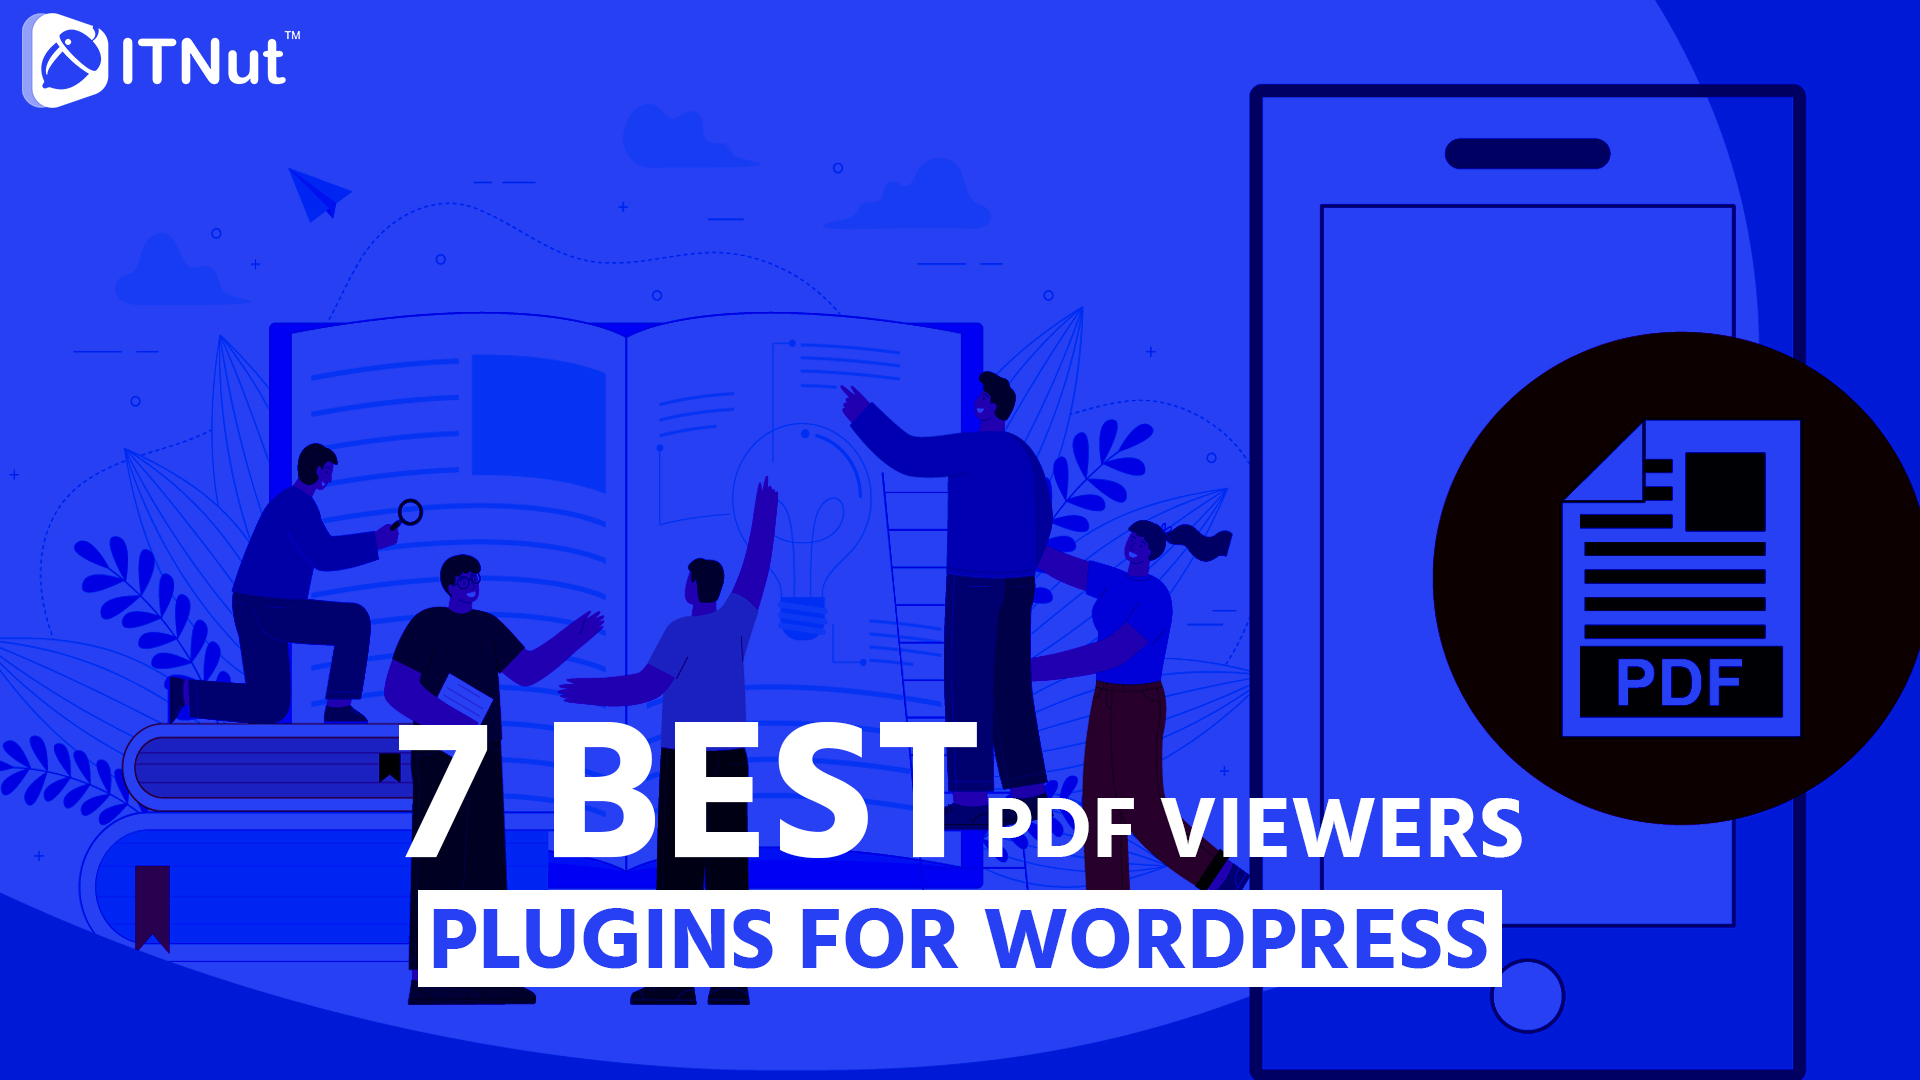 You are currently viewing 7 Best PDF Viewer Plugins for WordPress